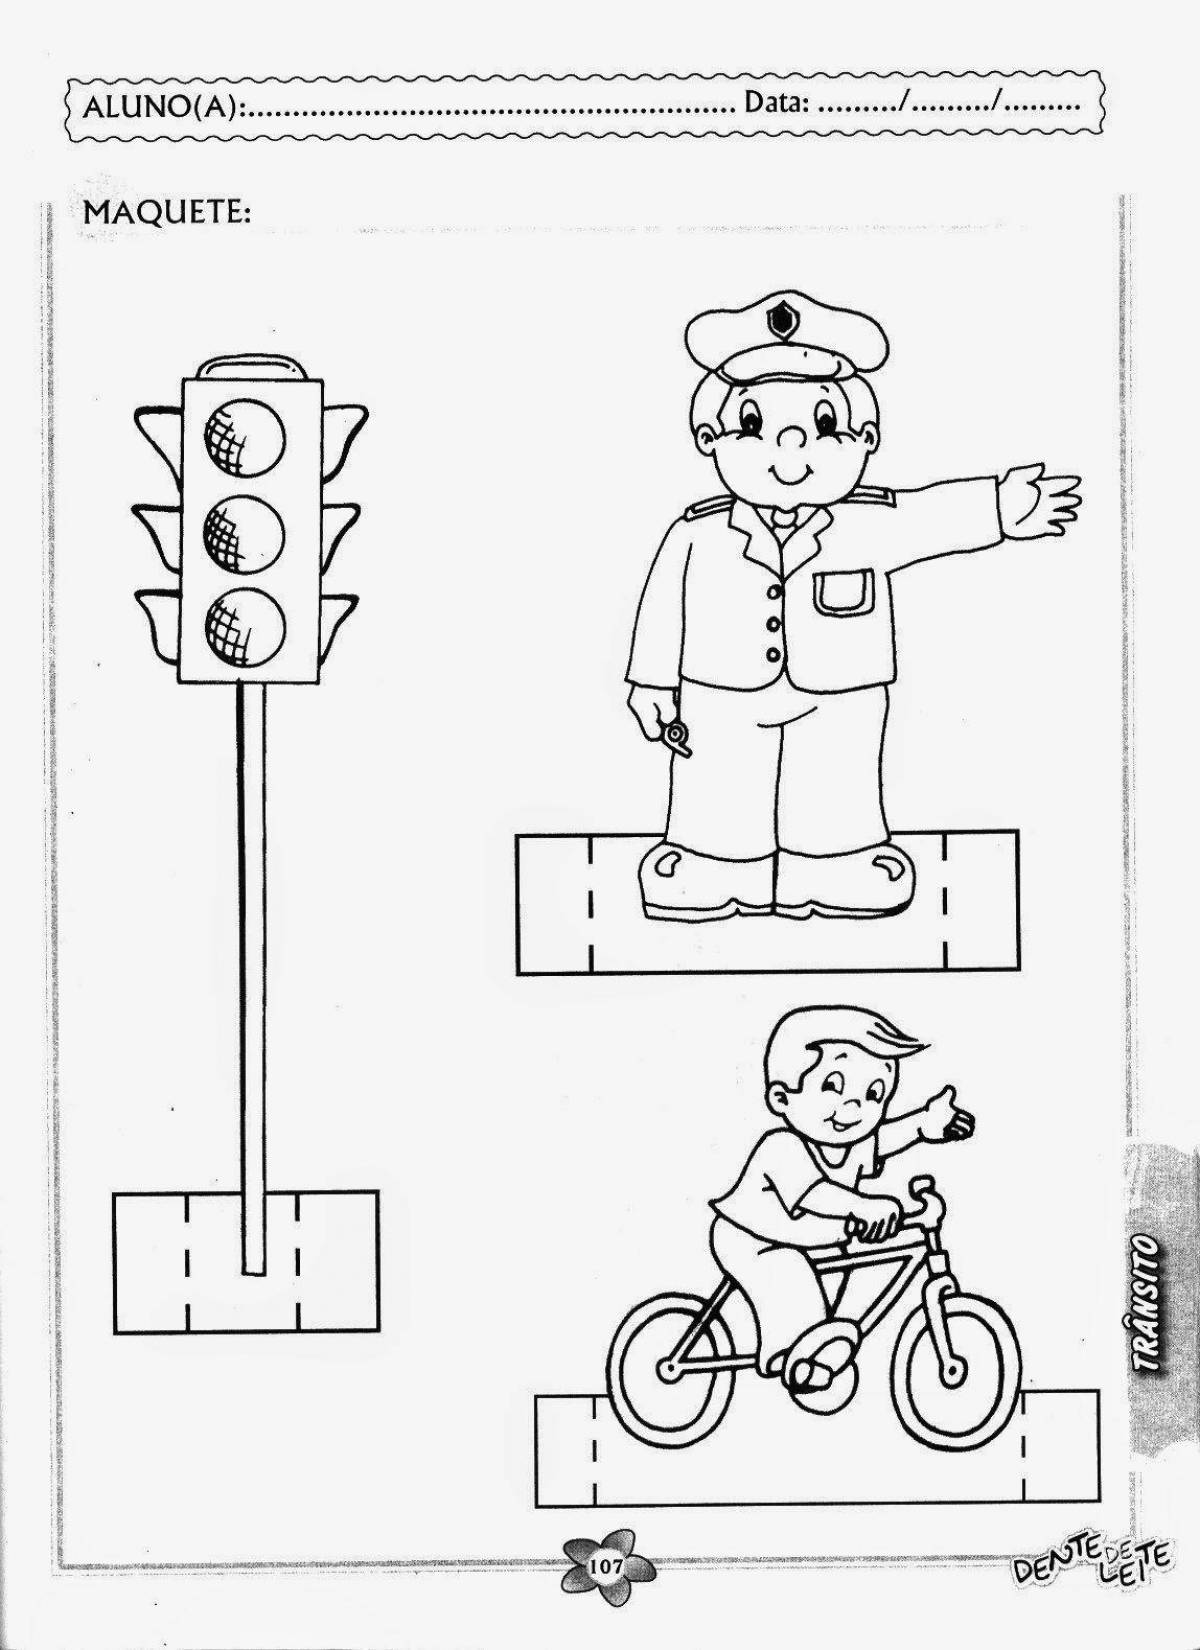 Animated traffic rules coloring page for toddlers